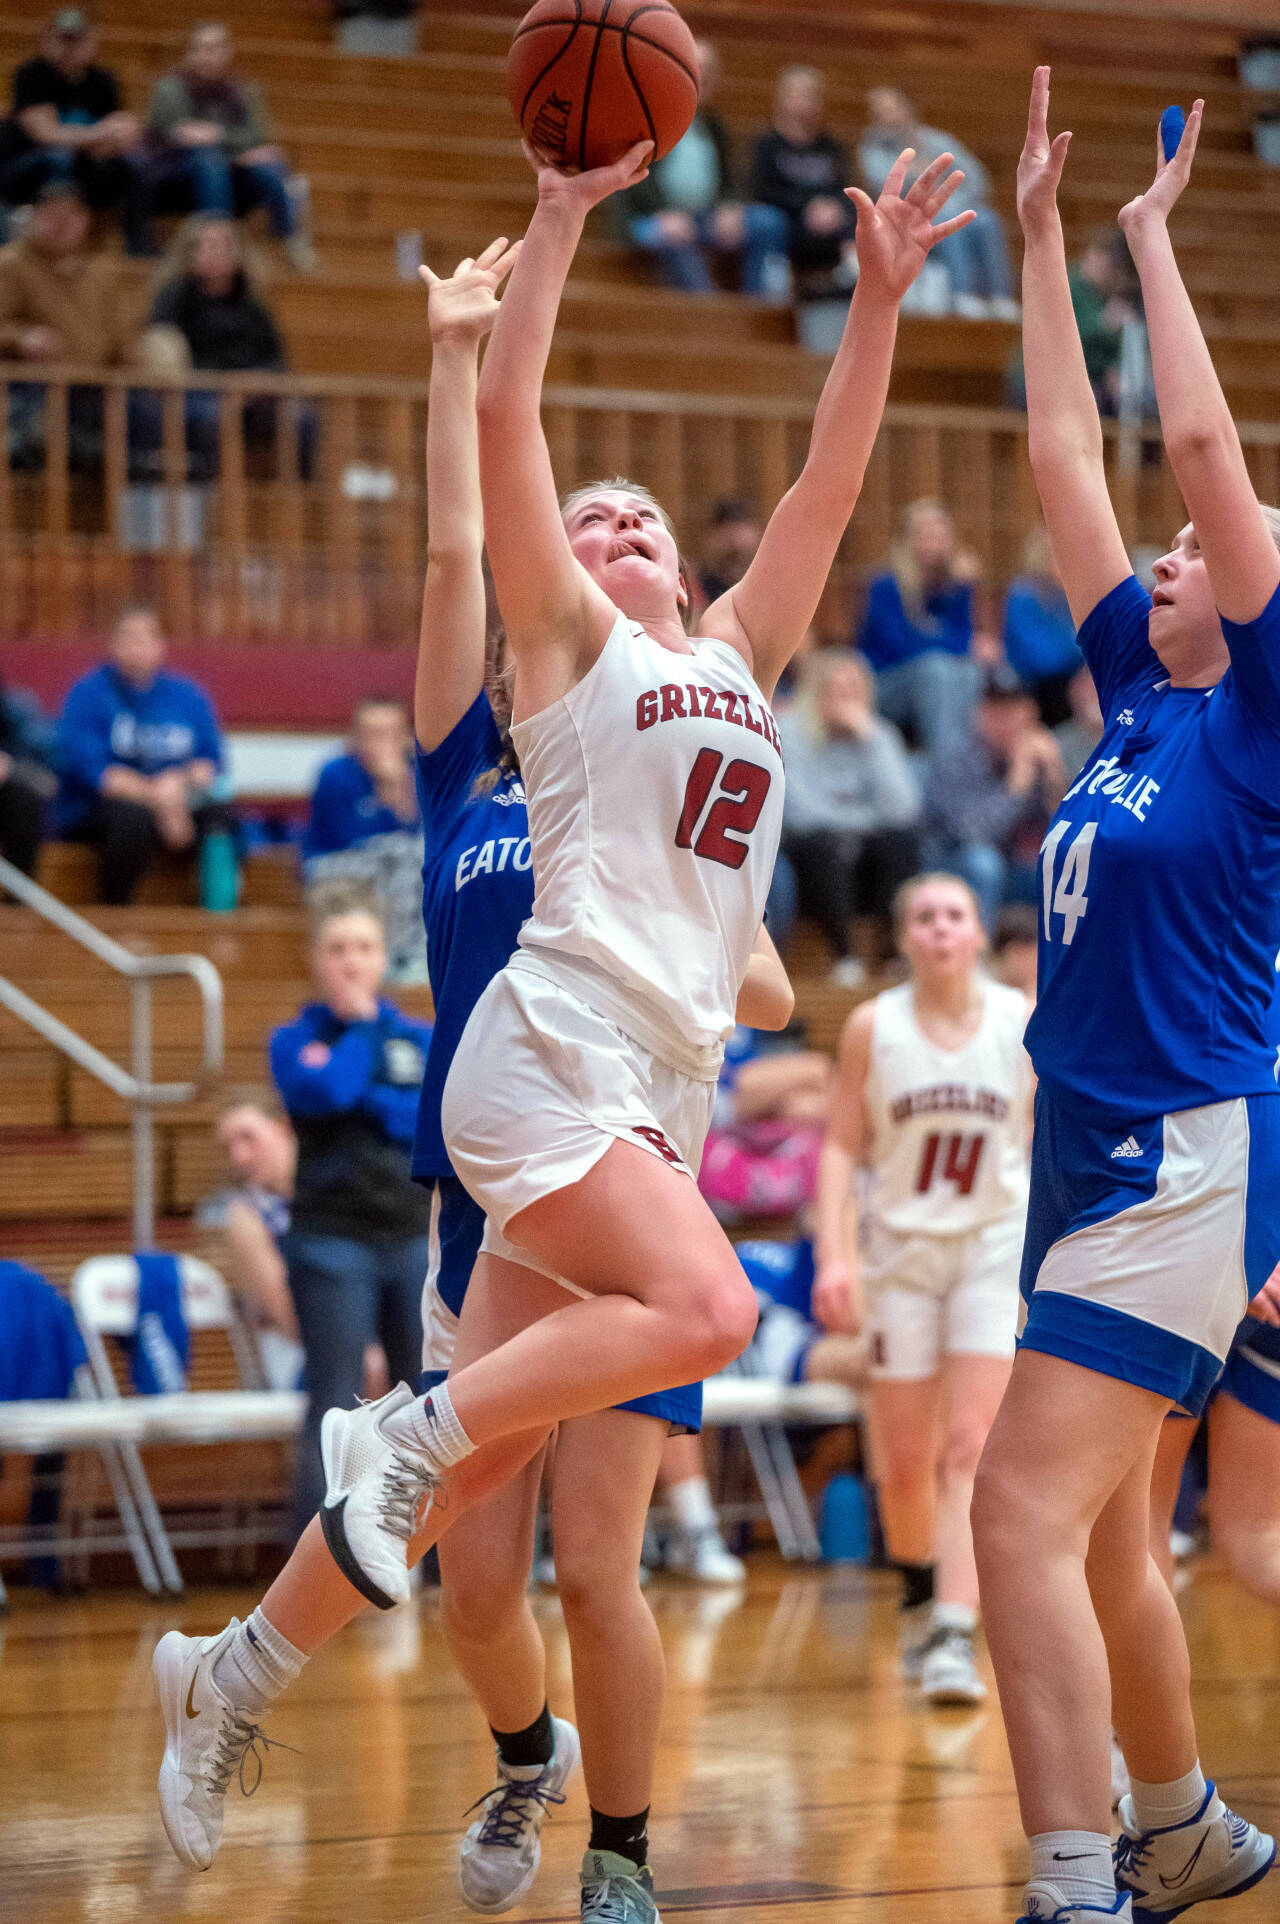 PHOTO BY FOREST WORGUM Hoquiam’s Ashlinn Cady (12) drives to the basket during Hoquiam’s 37-28 loss to Eatonville on Thursday at Hoquiam High School.